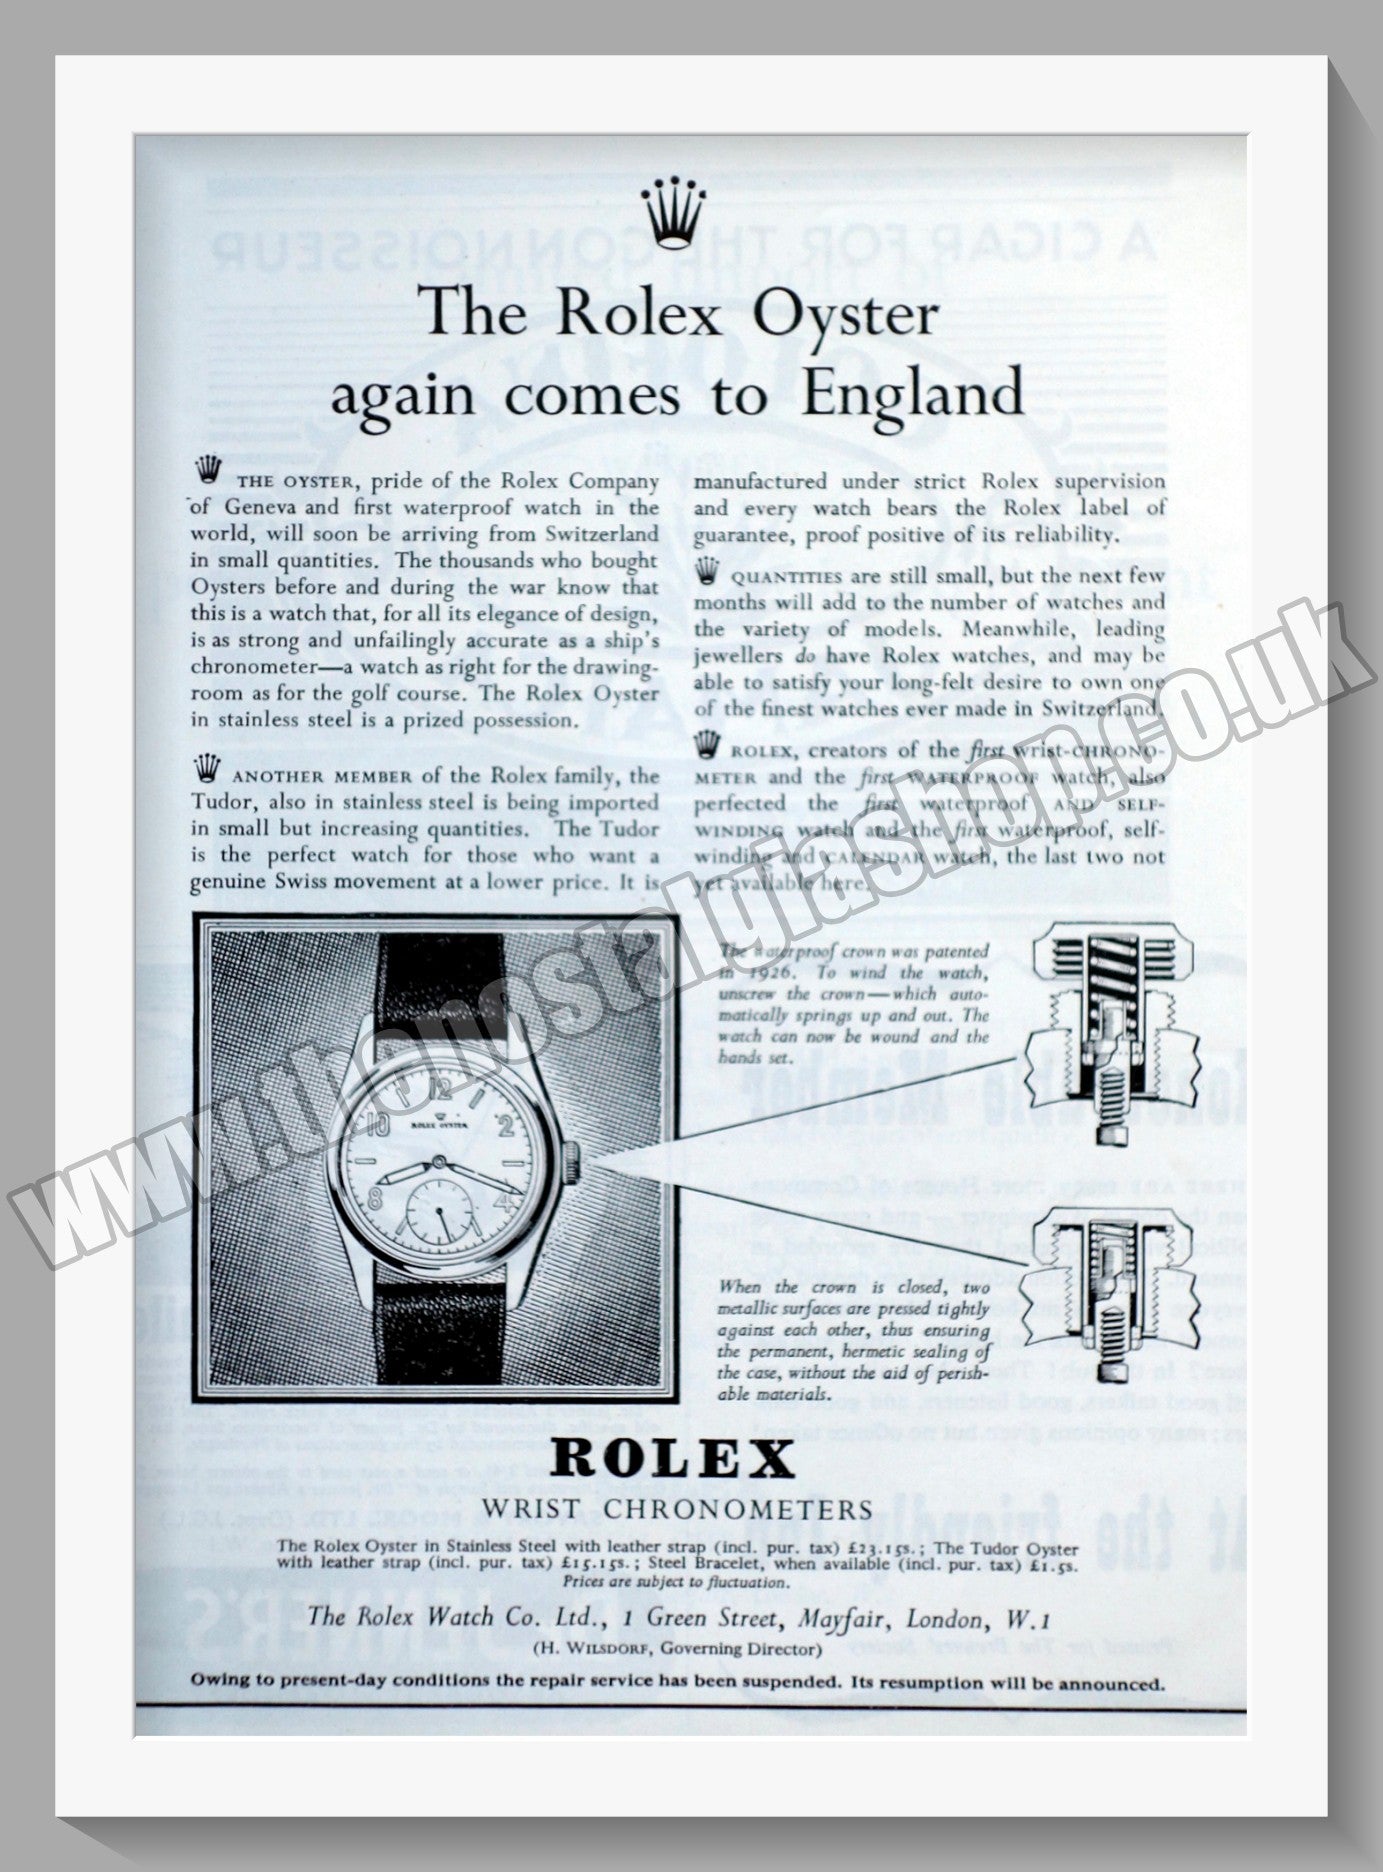 Rolex Oyster Comes to England. Original Advert 1947 (ref AD57792)